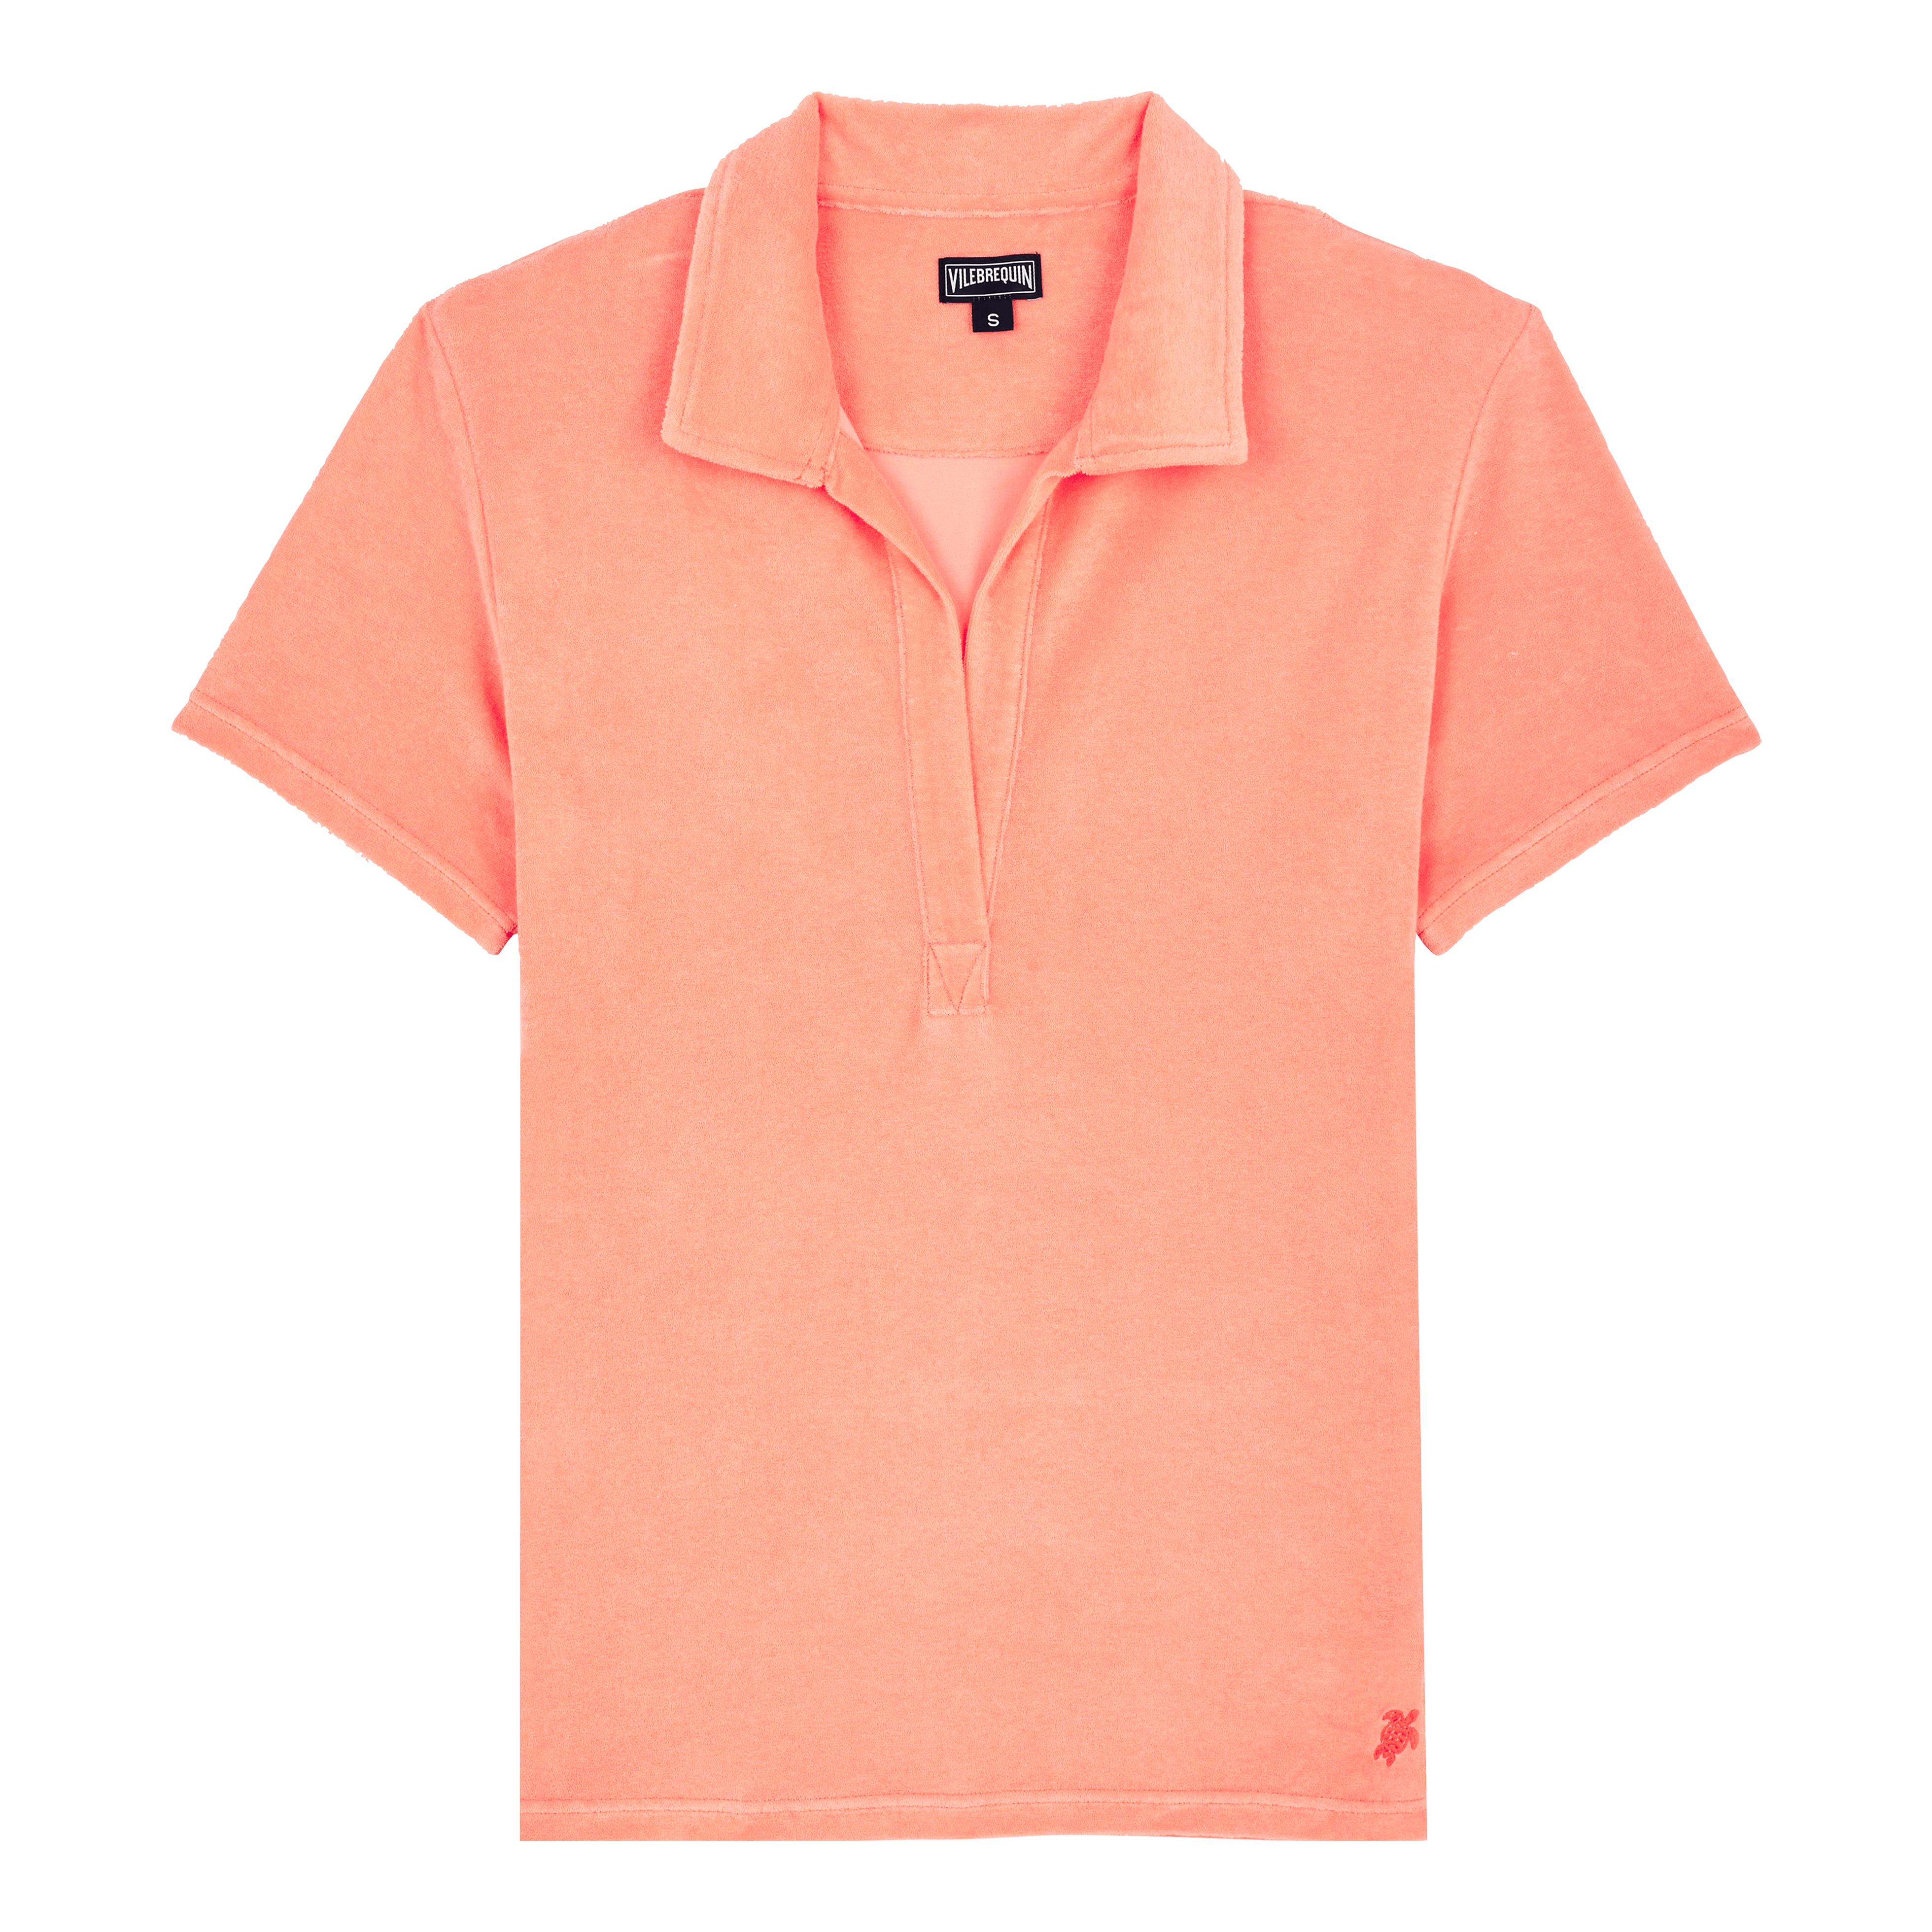 Vilebrequin Cotton Women Terry Cloth Polo Shirt Solid in Pink - Lyst